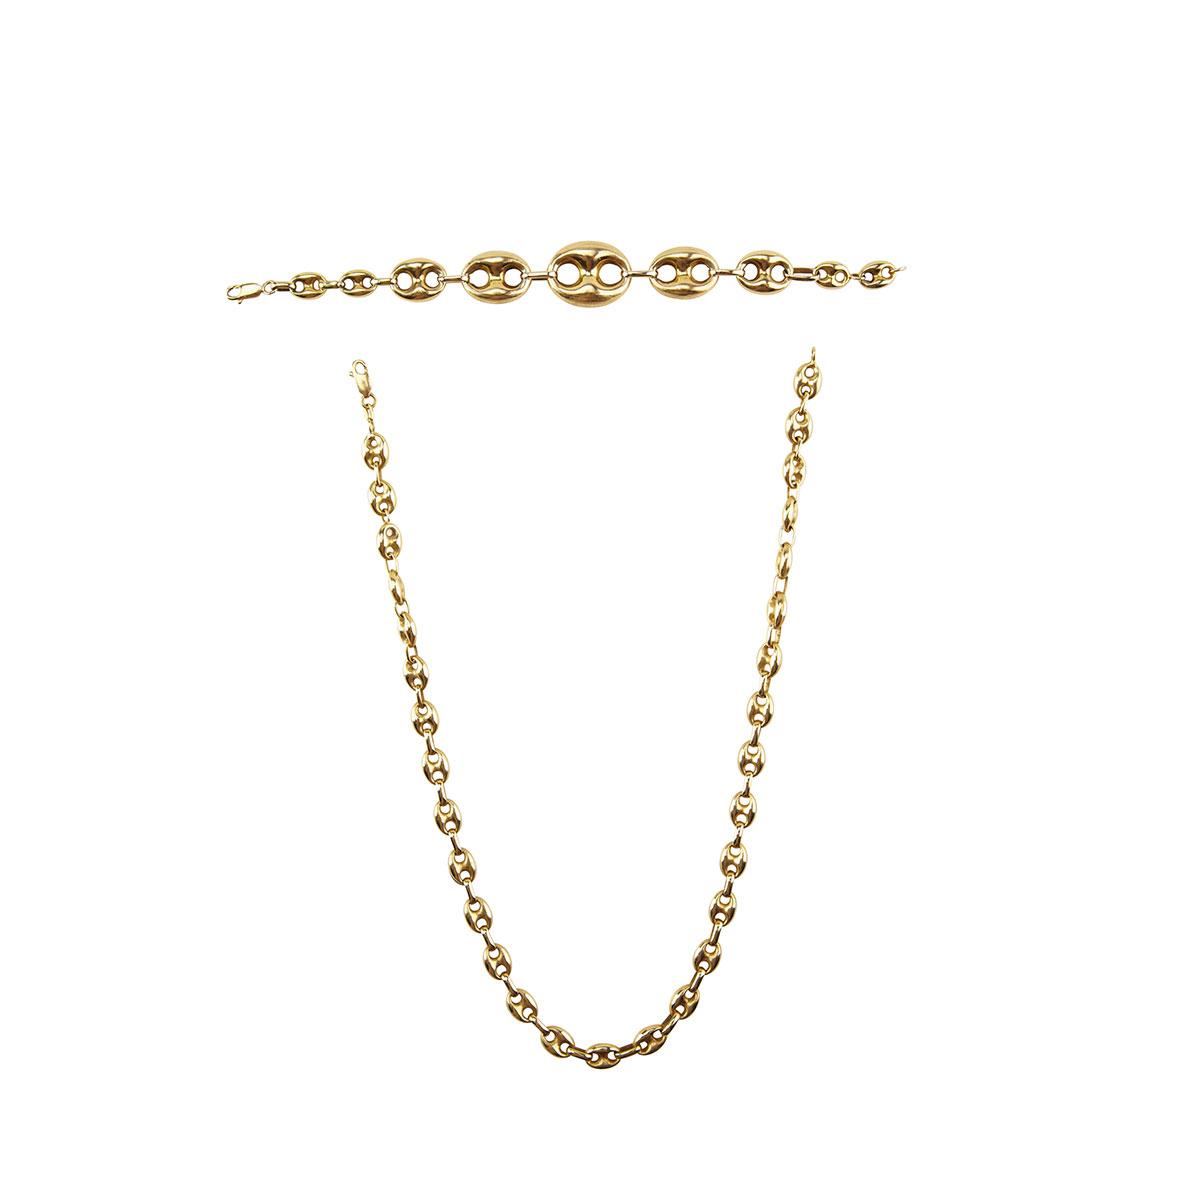 Italian 18k Yellow Gold Gucci-Style Necklace And Bracelet